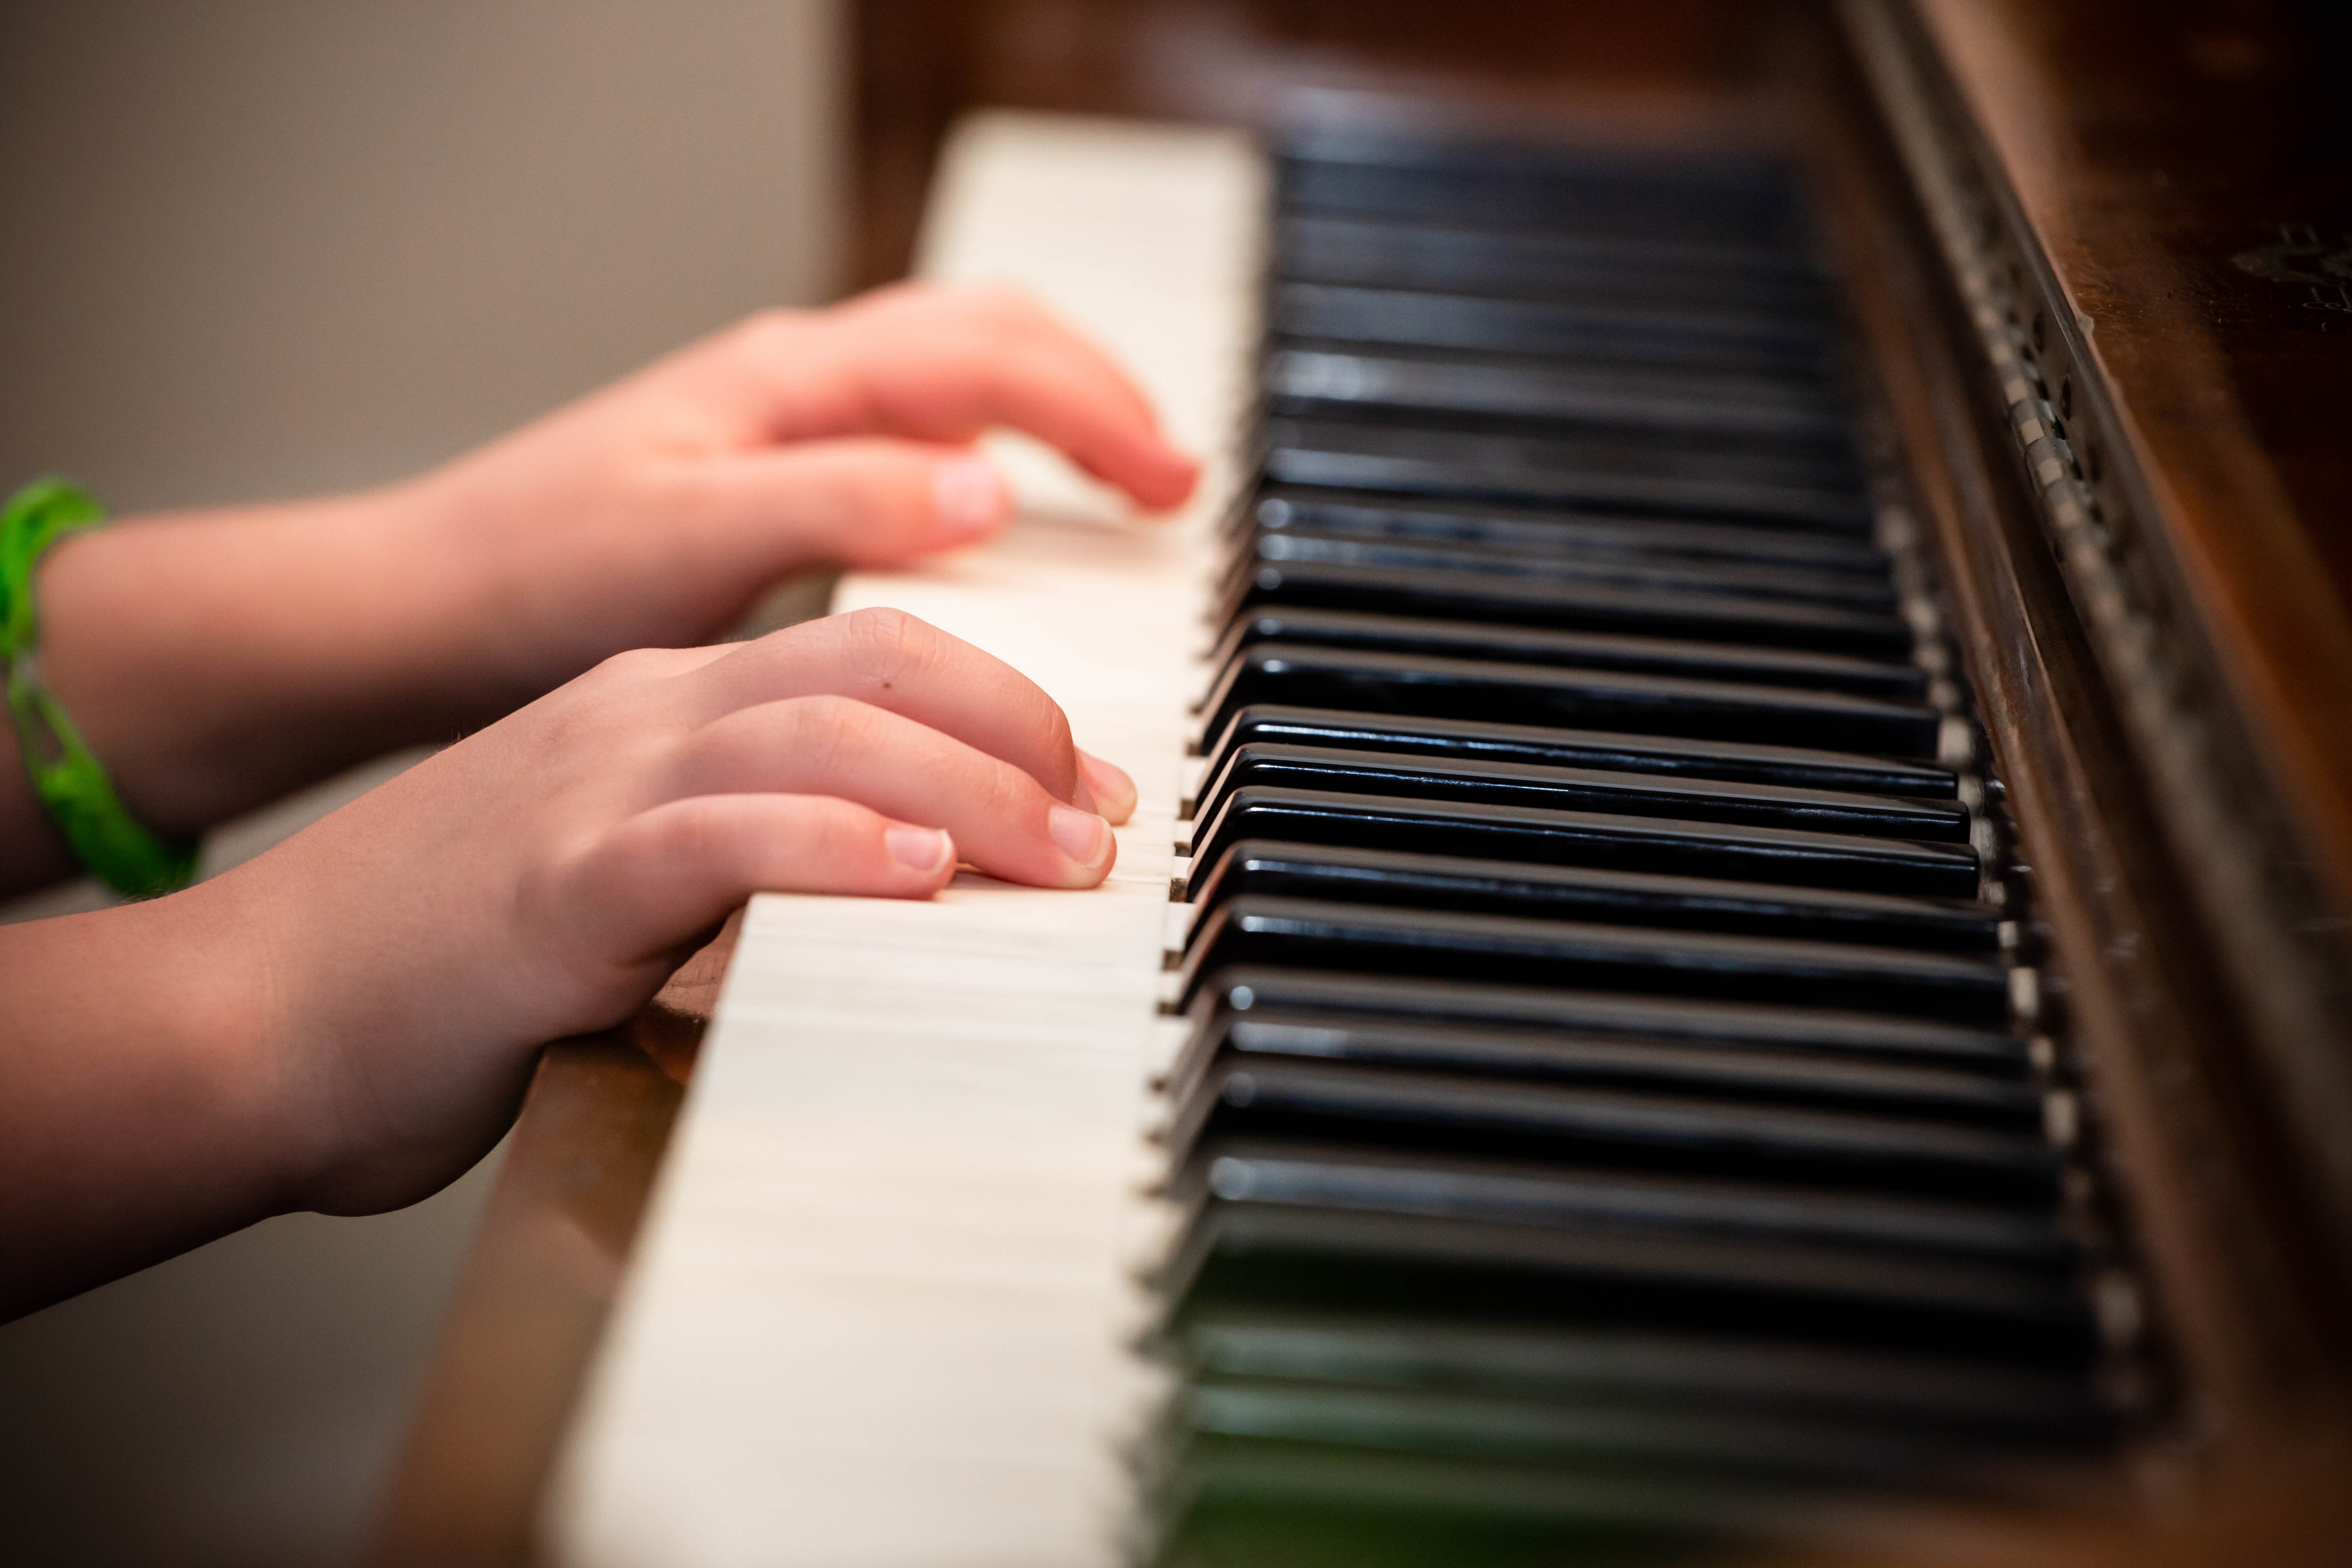 music lessons guitar lessons piano lesson voice lessons violin lesssons singing lessons drum lessons in st joseph mo near me toddler music art classes 51